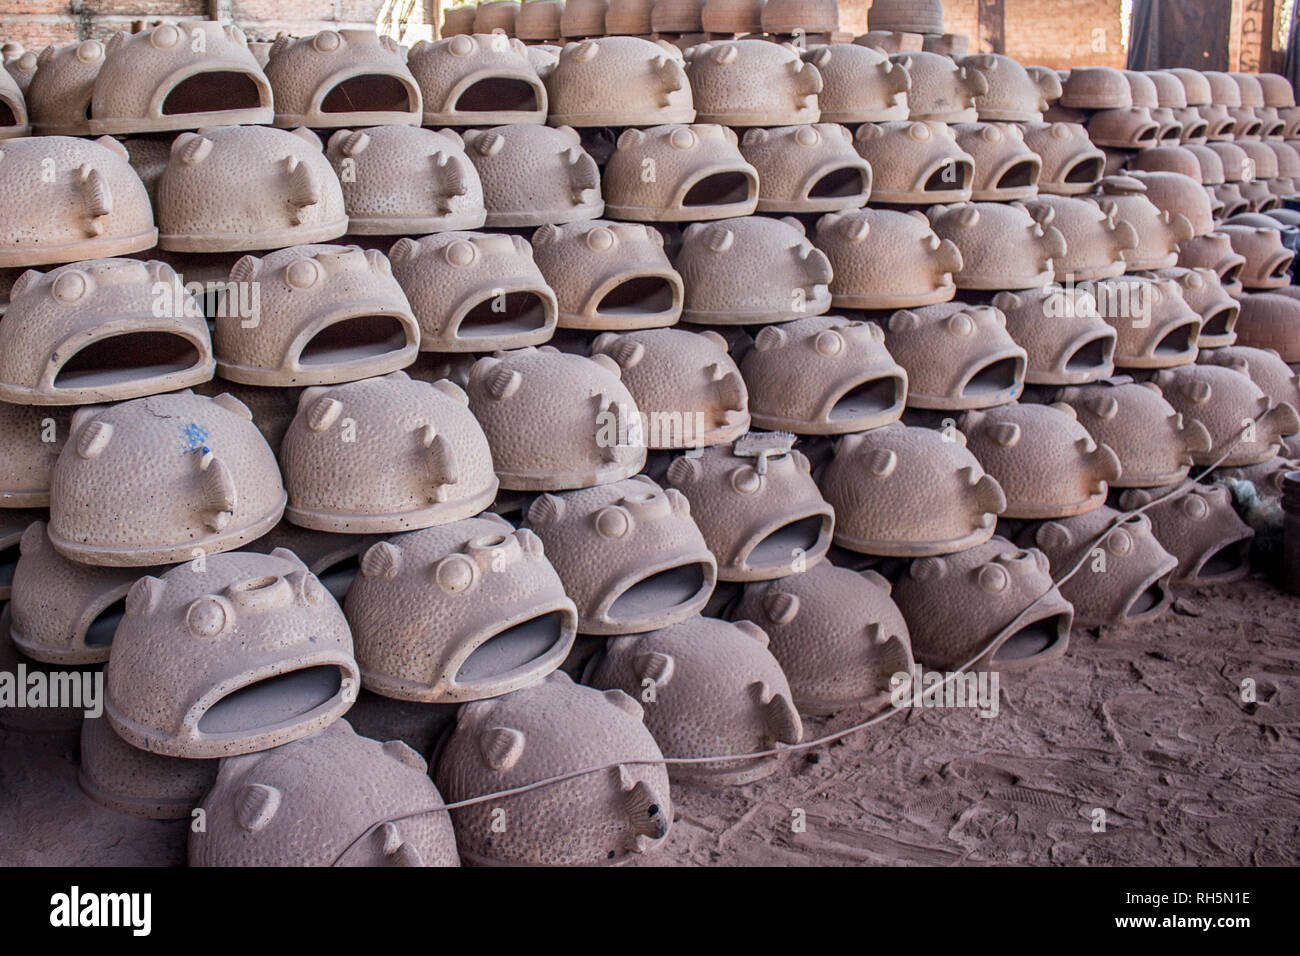 Pizza ovens drying in the shape of fish crafted by hand in Mexico Stock Photo